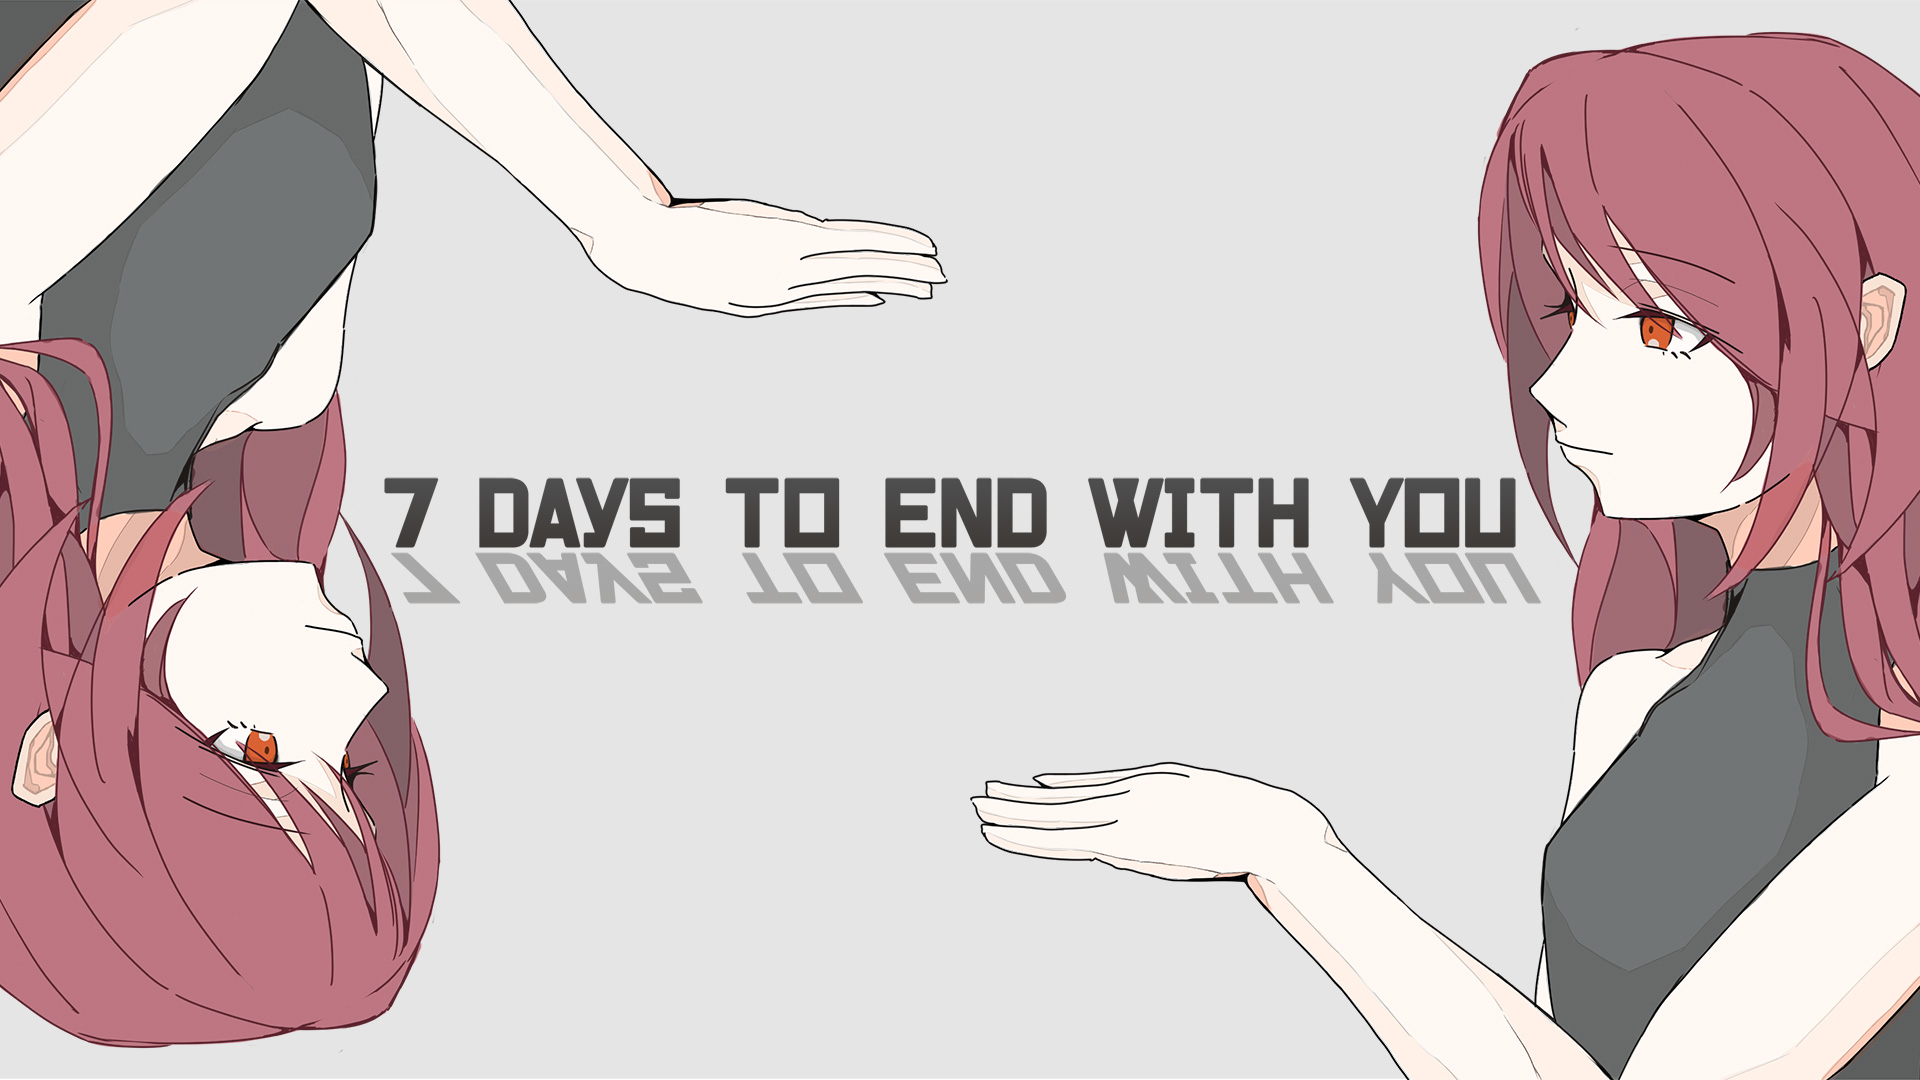 7 Days to End with You - Nintendo eShop Now Live! Steam Update & Special Giveaway!